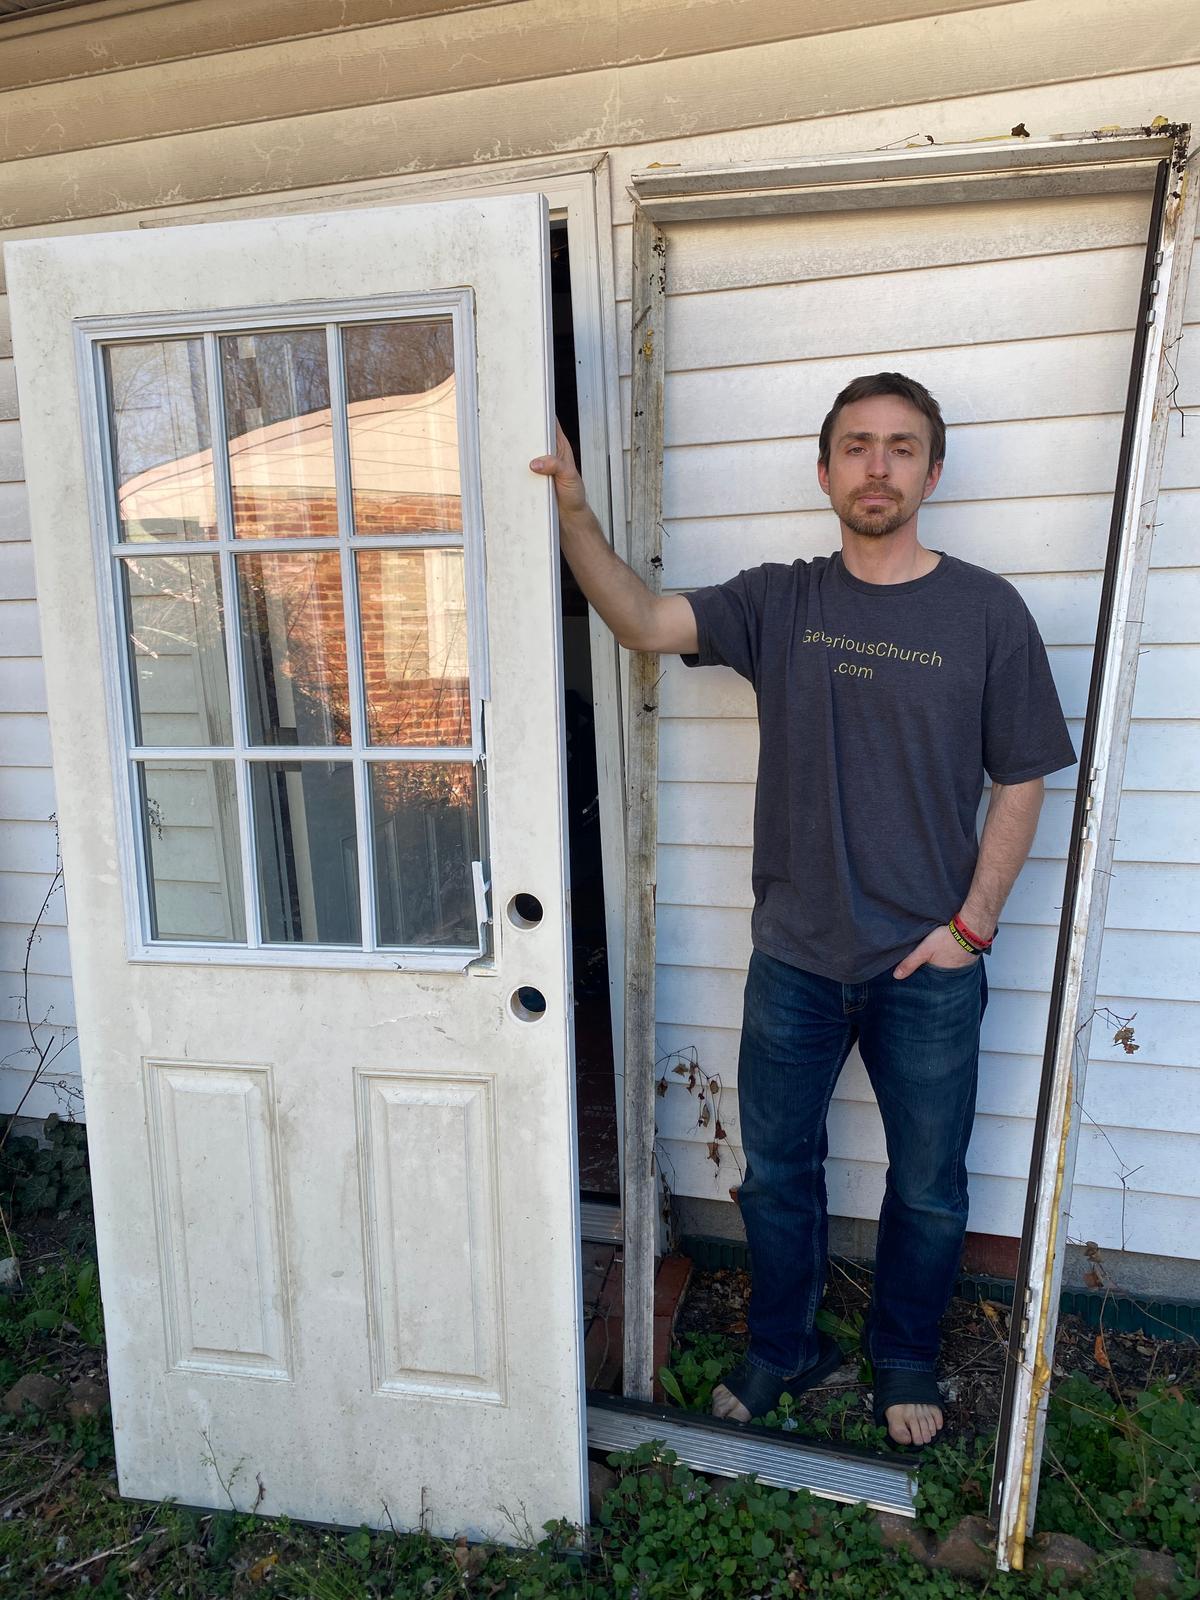 Jonathan Darnel stands beside a door that the FBI smashed in during a predawn raid on his house. Photo taken near Alexandria, Virginia. (Courtesy of Jonathan Darnel)